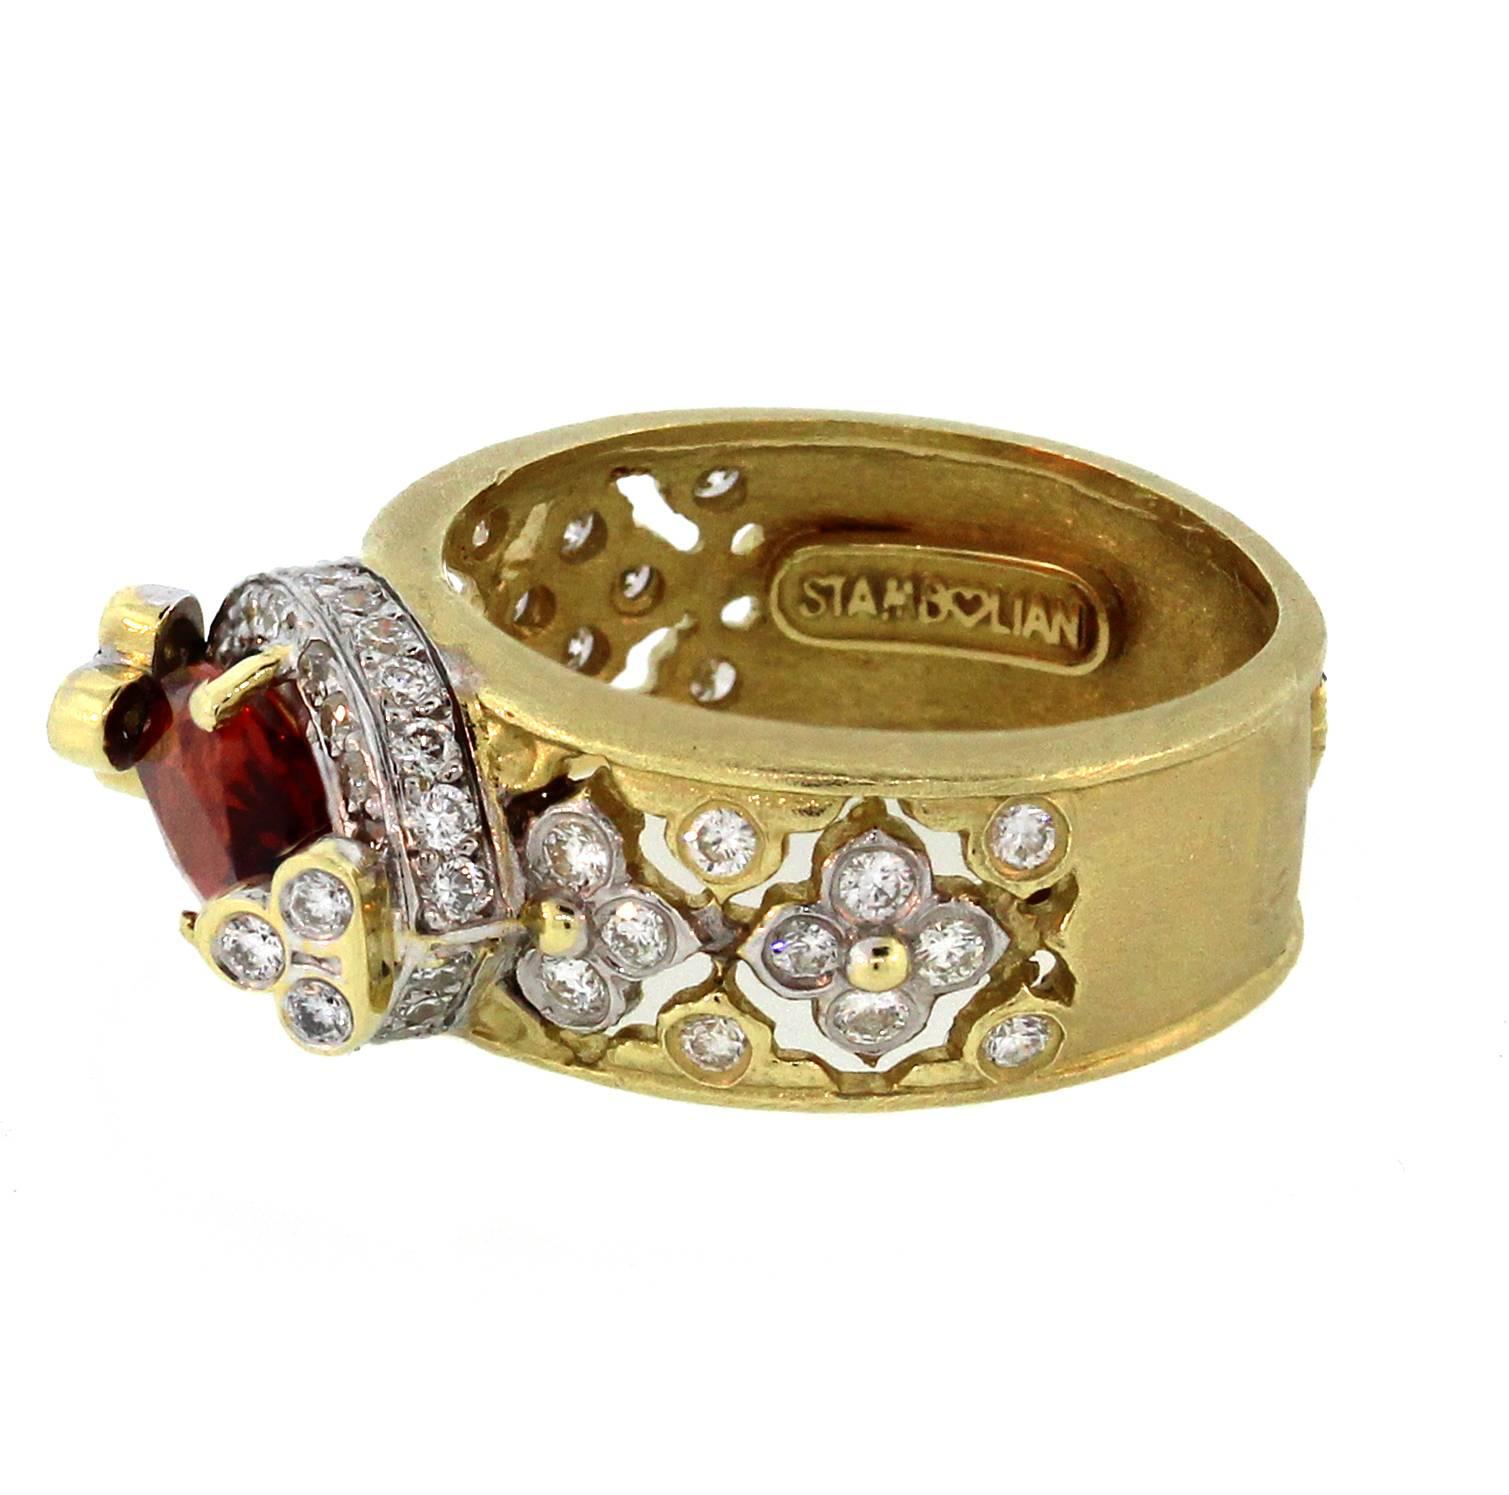 18K Yellow Gold Ring with Marquis Spessartite Garnet Center and Diamonds

This Mandarin orange spessartite Garnet has beautiful color. Is marquis cut and very clean. Weights 1.69ct.

0.70. G Color, VS Clarity Diamonds are set throughout rest of the